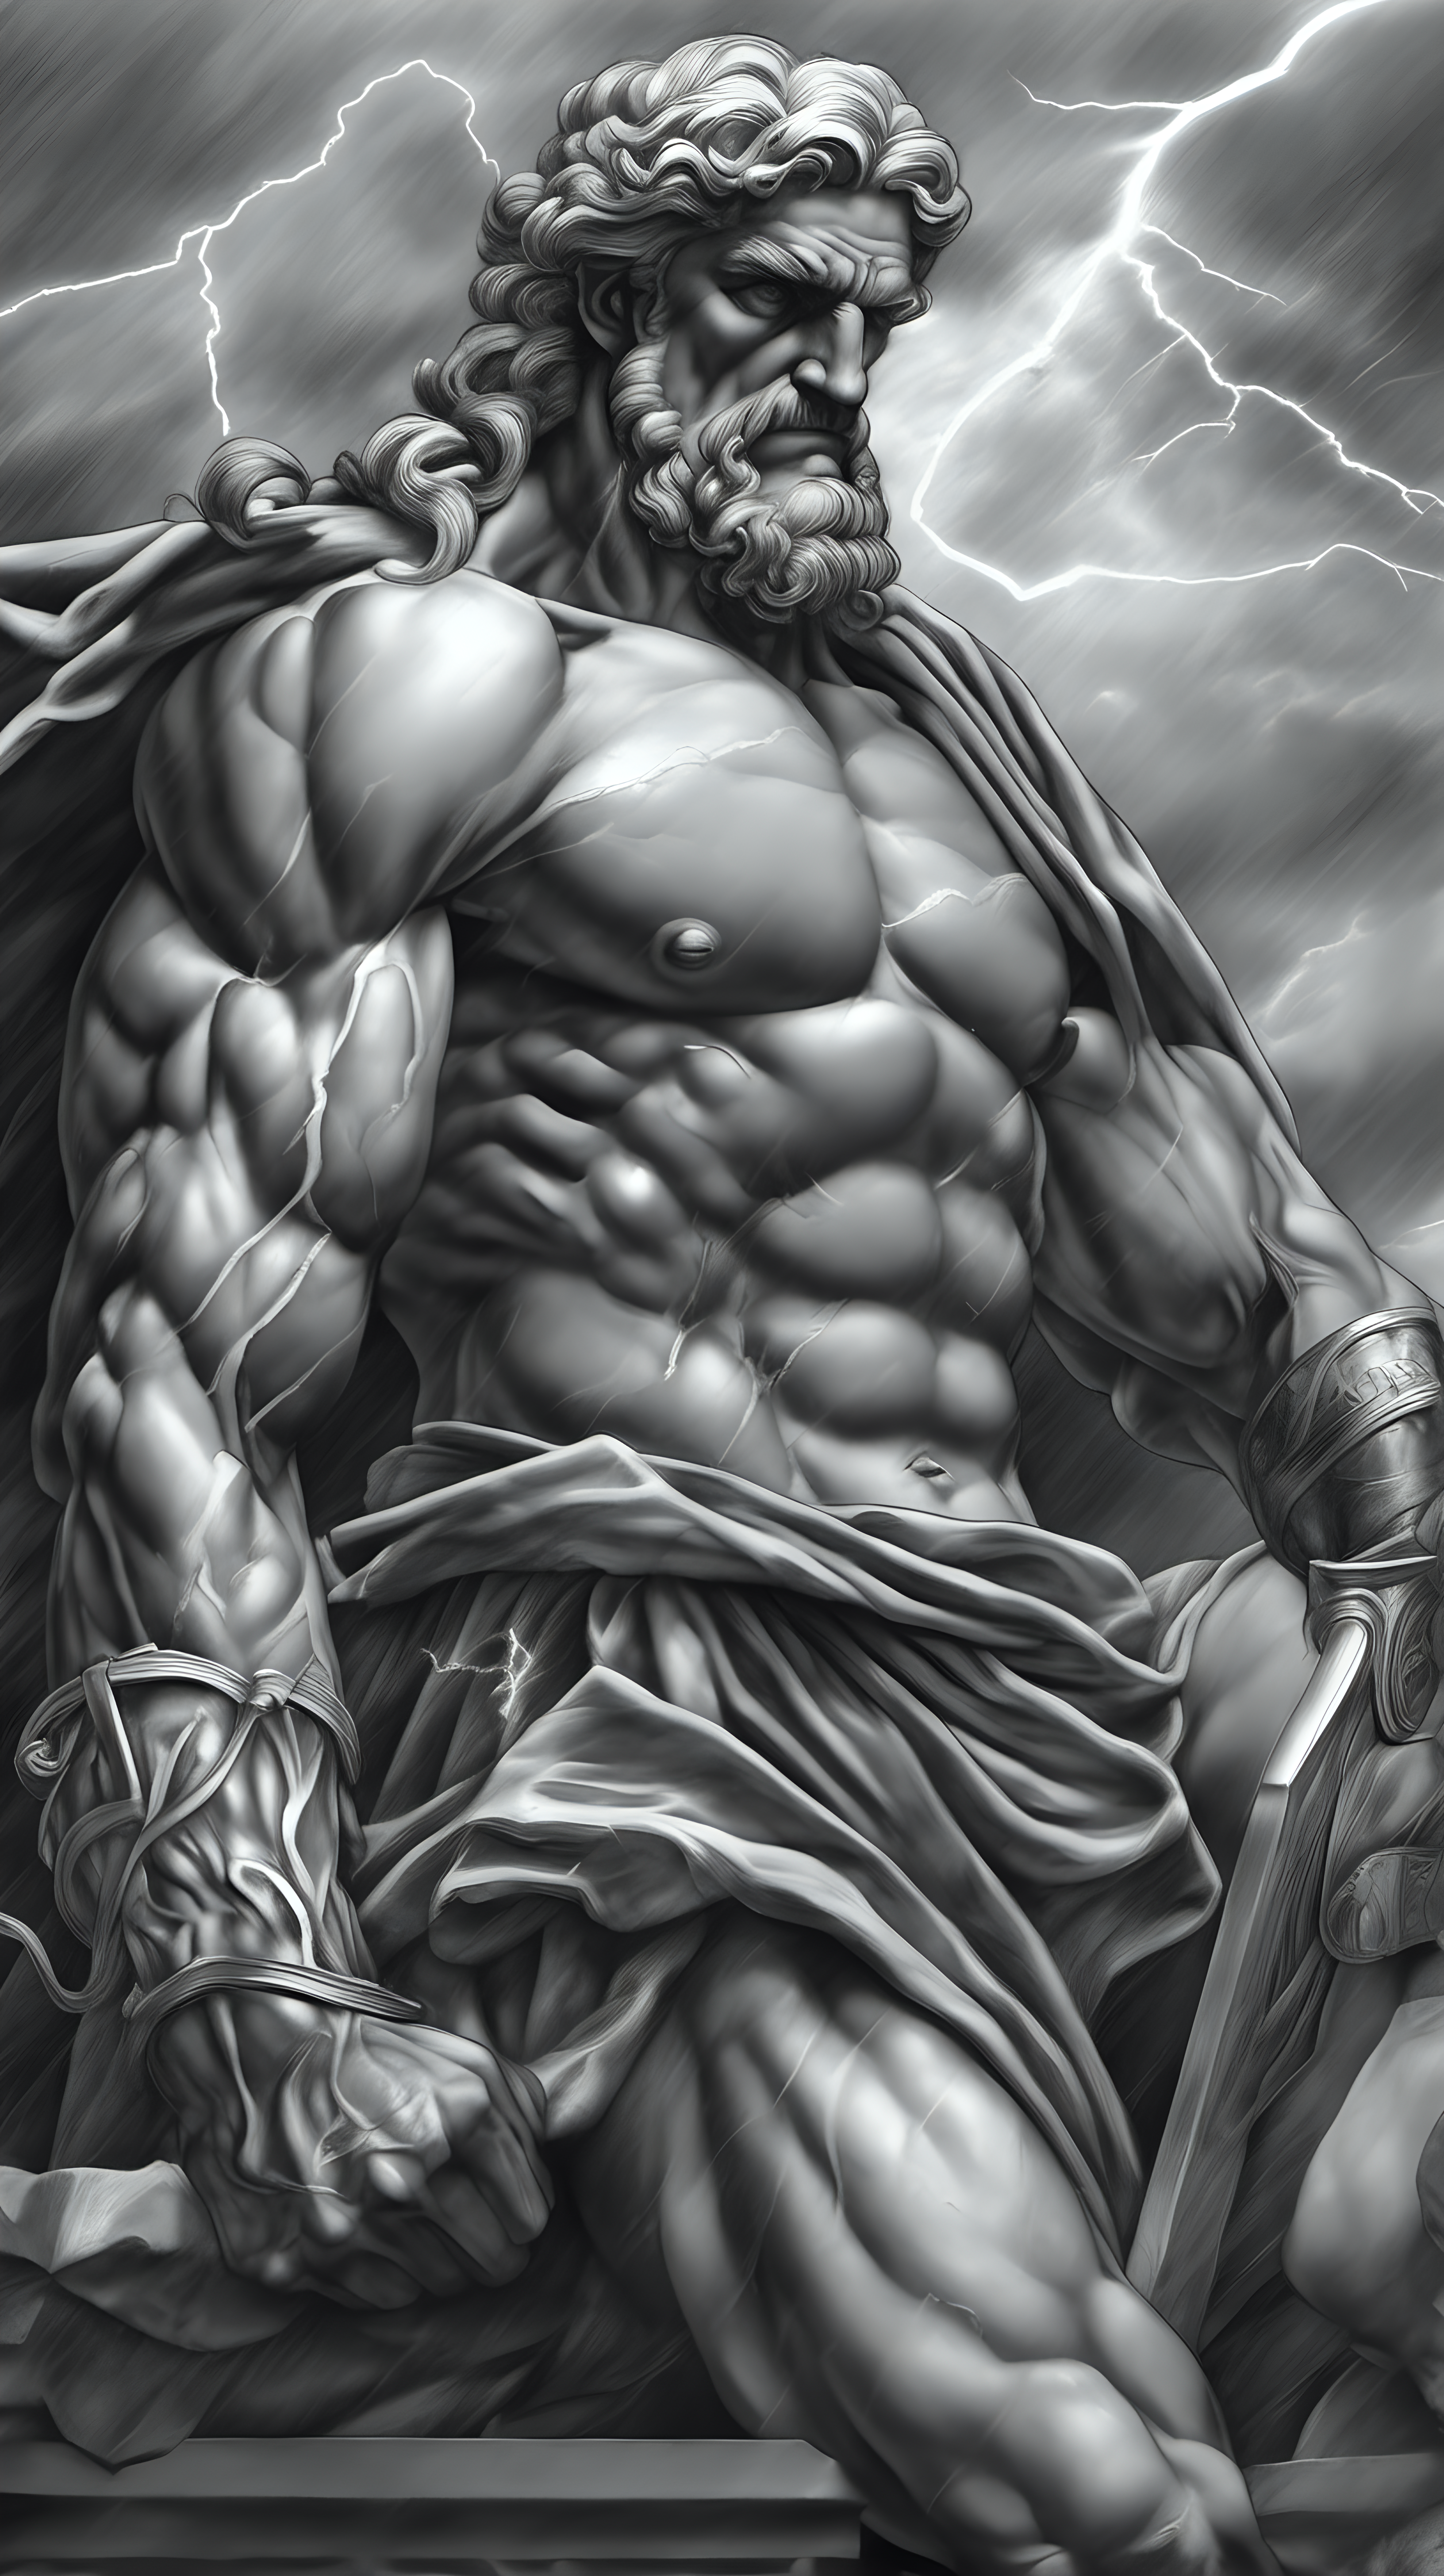 /imagine prompt : a hyper realistic black and gray Michelangelo drawing, feautering  gods & goddesses greek mytology titan war

-no cut
<background>thunder and lightning
<style>pencil drawing
_ar 9:16